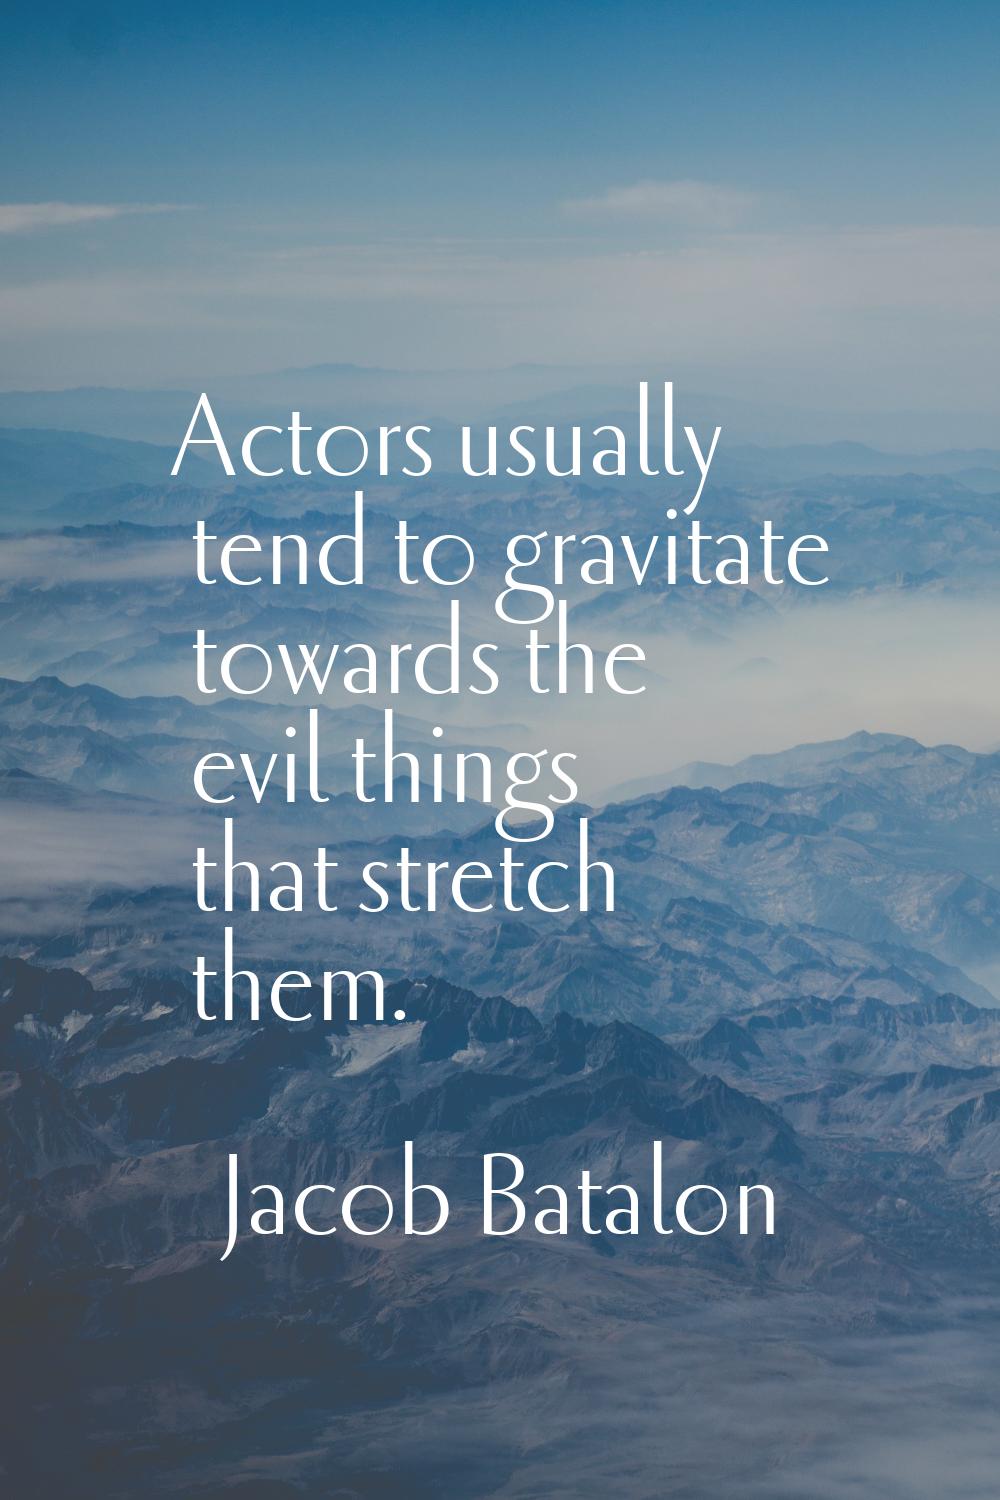 Actors usually tend to gravitate towards the evil things that stretch them.